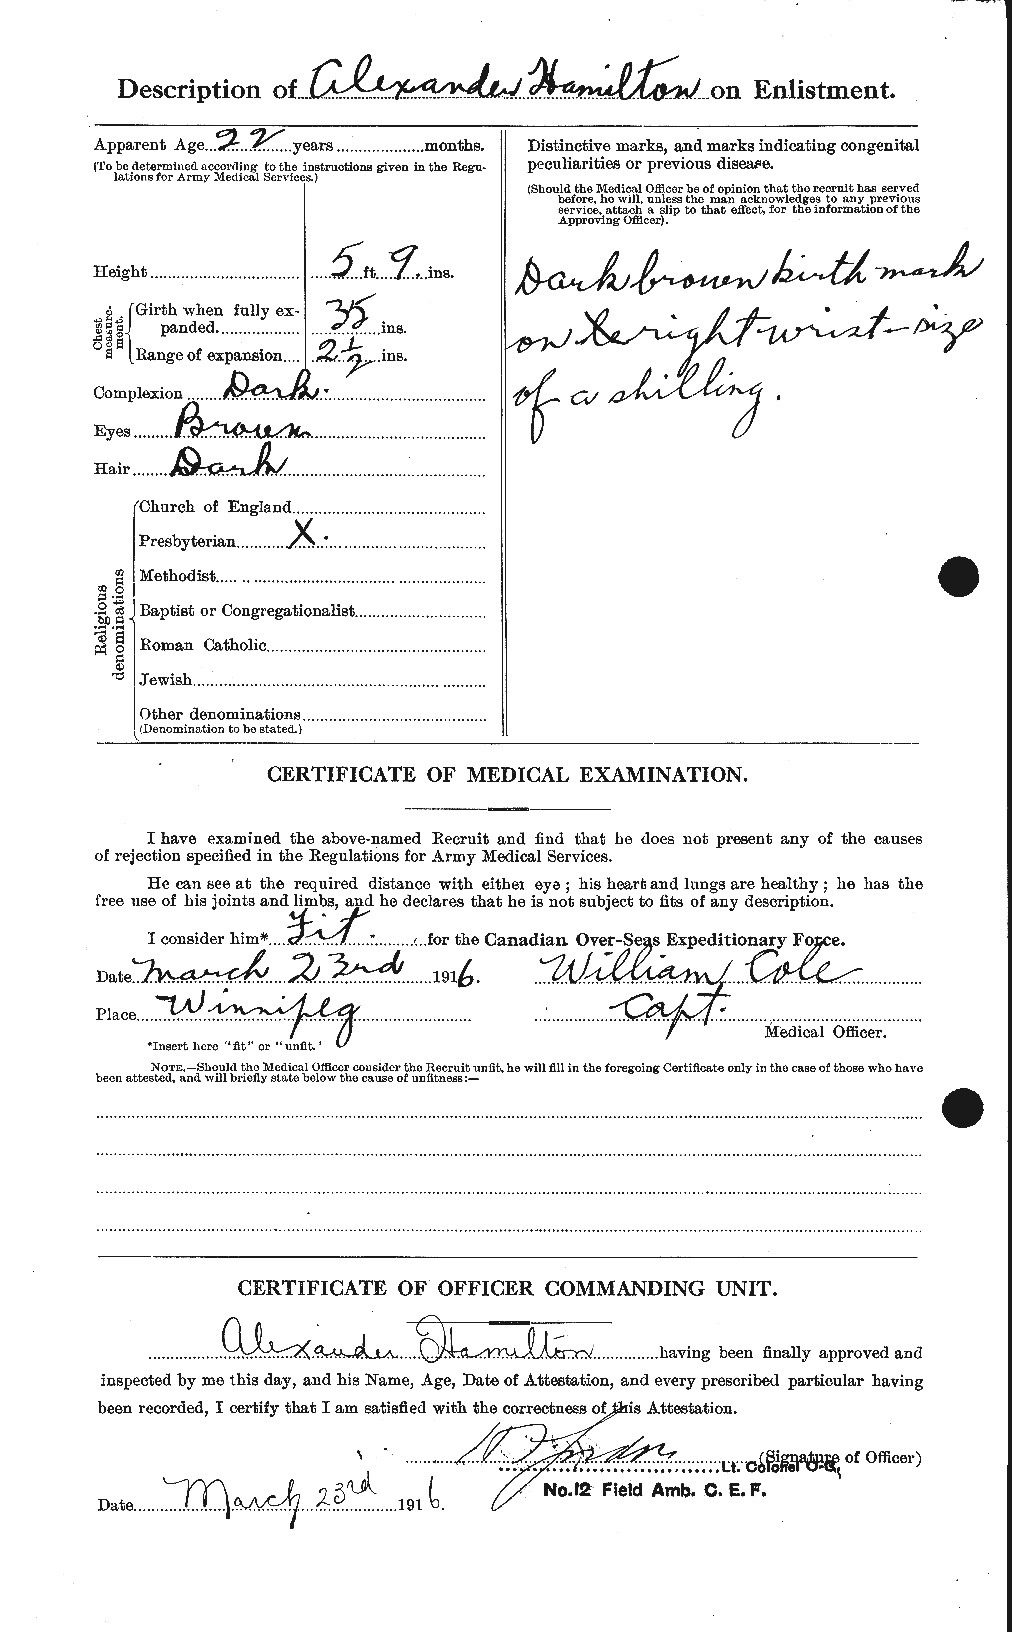 Personnel Records of the First World War - CEF 375188b